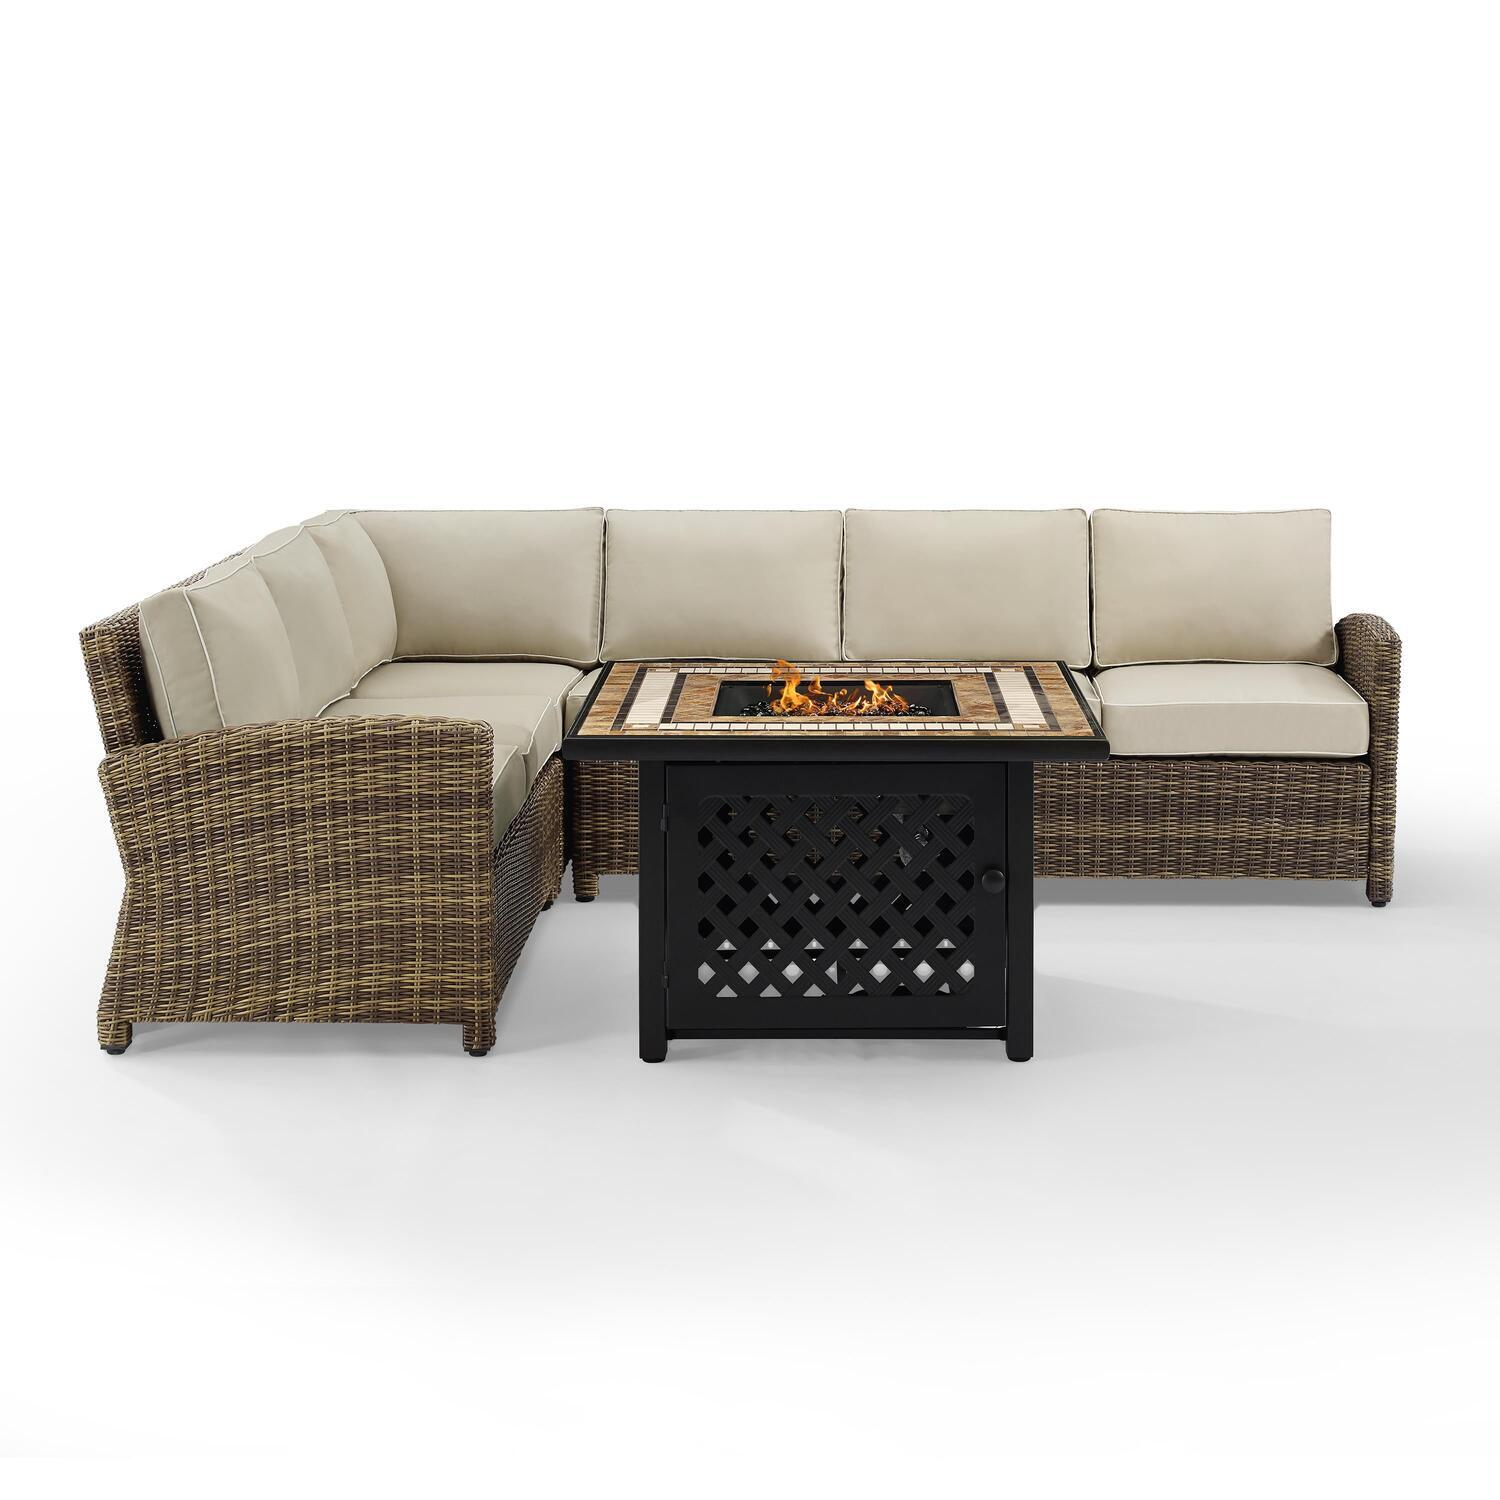 Bradenton 5Pc Outdoor Wicker Sectional Set W/Fire Table Weathered Brown/Sand - Right Corner Loveseat, Left Corner Loveseat, Corner Chair, Center Chair, & Tucson Fire Table - image 1 of 9